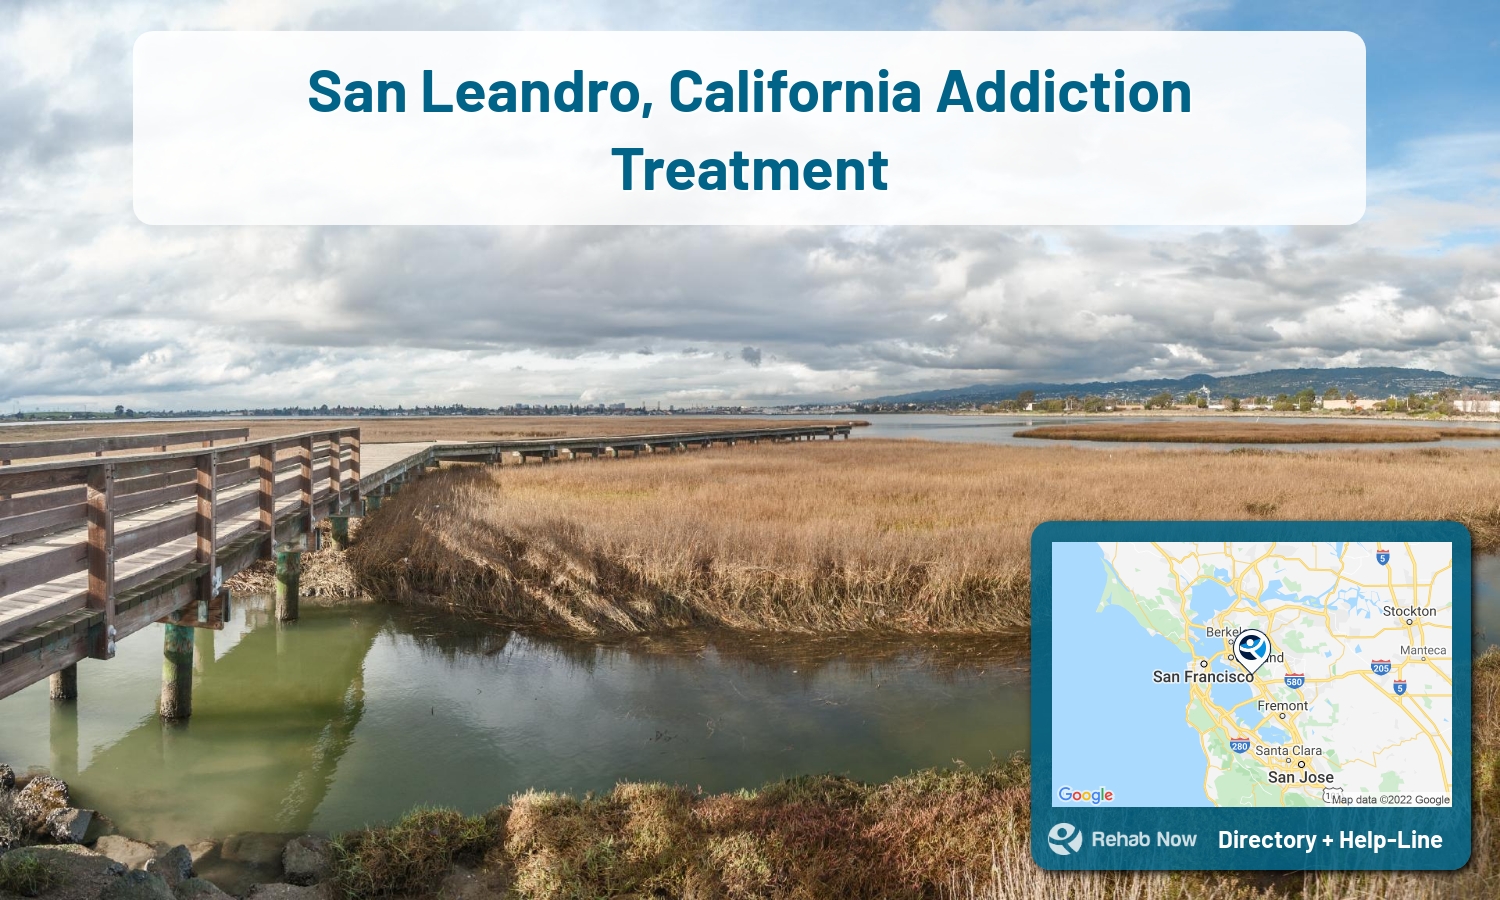 View options, availability, treatment methods, and more, for drug rehab and alcohol treatment in San Leandro, California